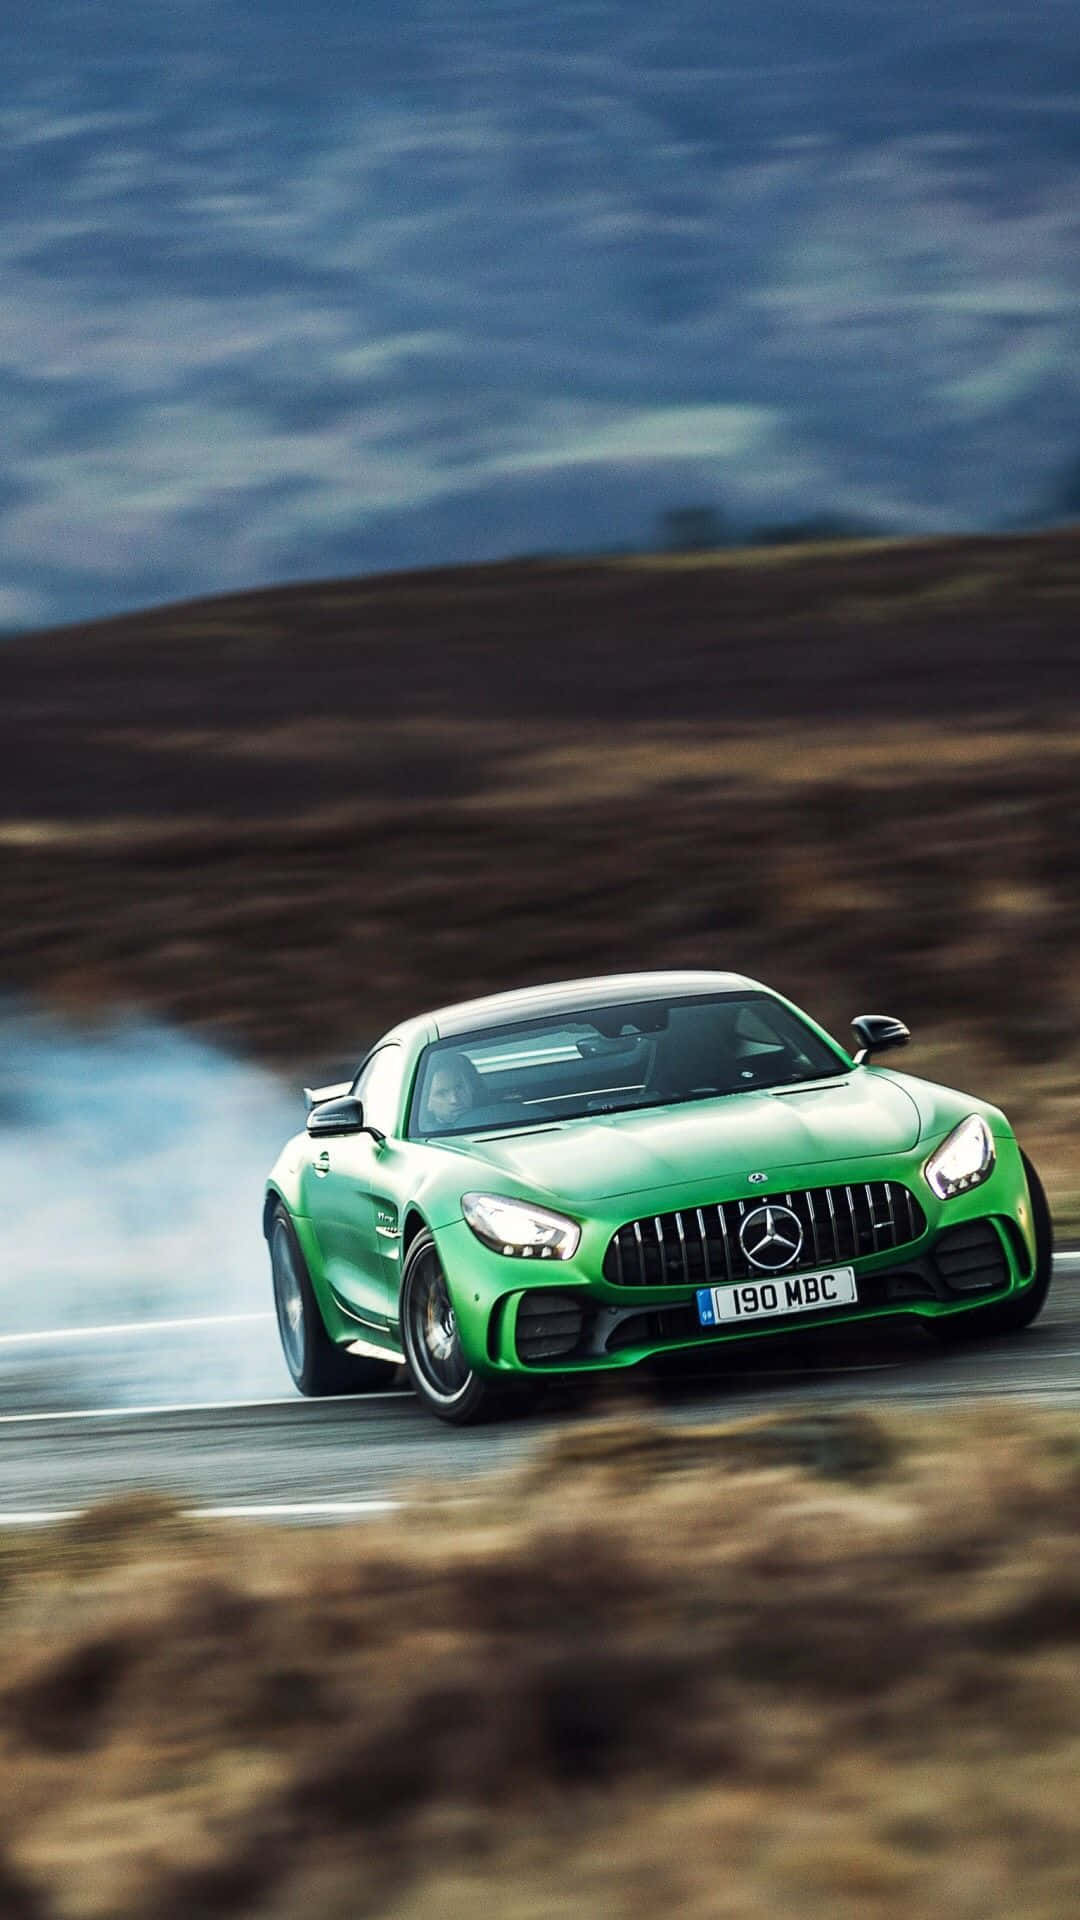 Stay Connected with a Mercedes-Benz Phone Wallpaper